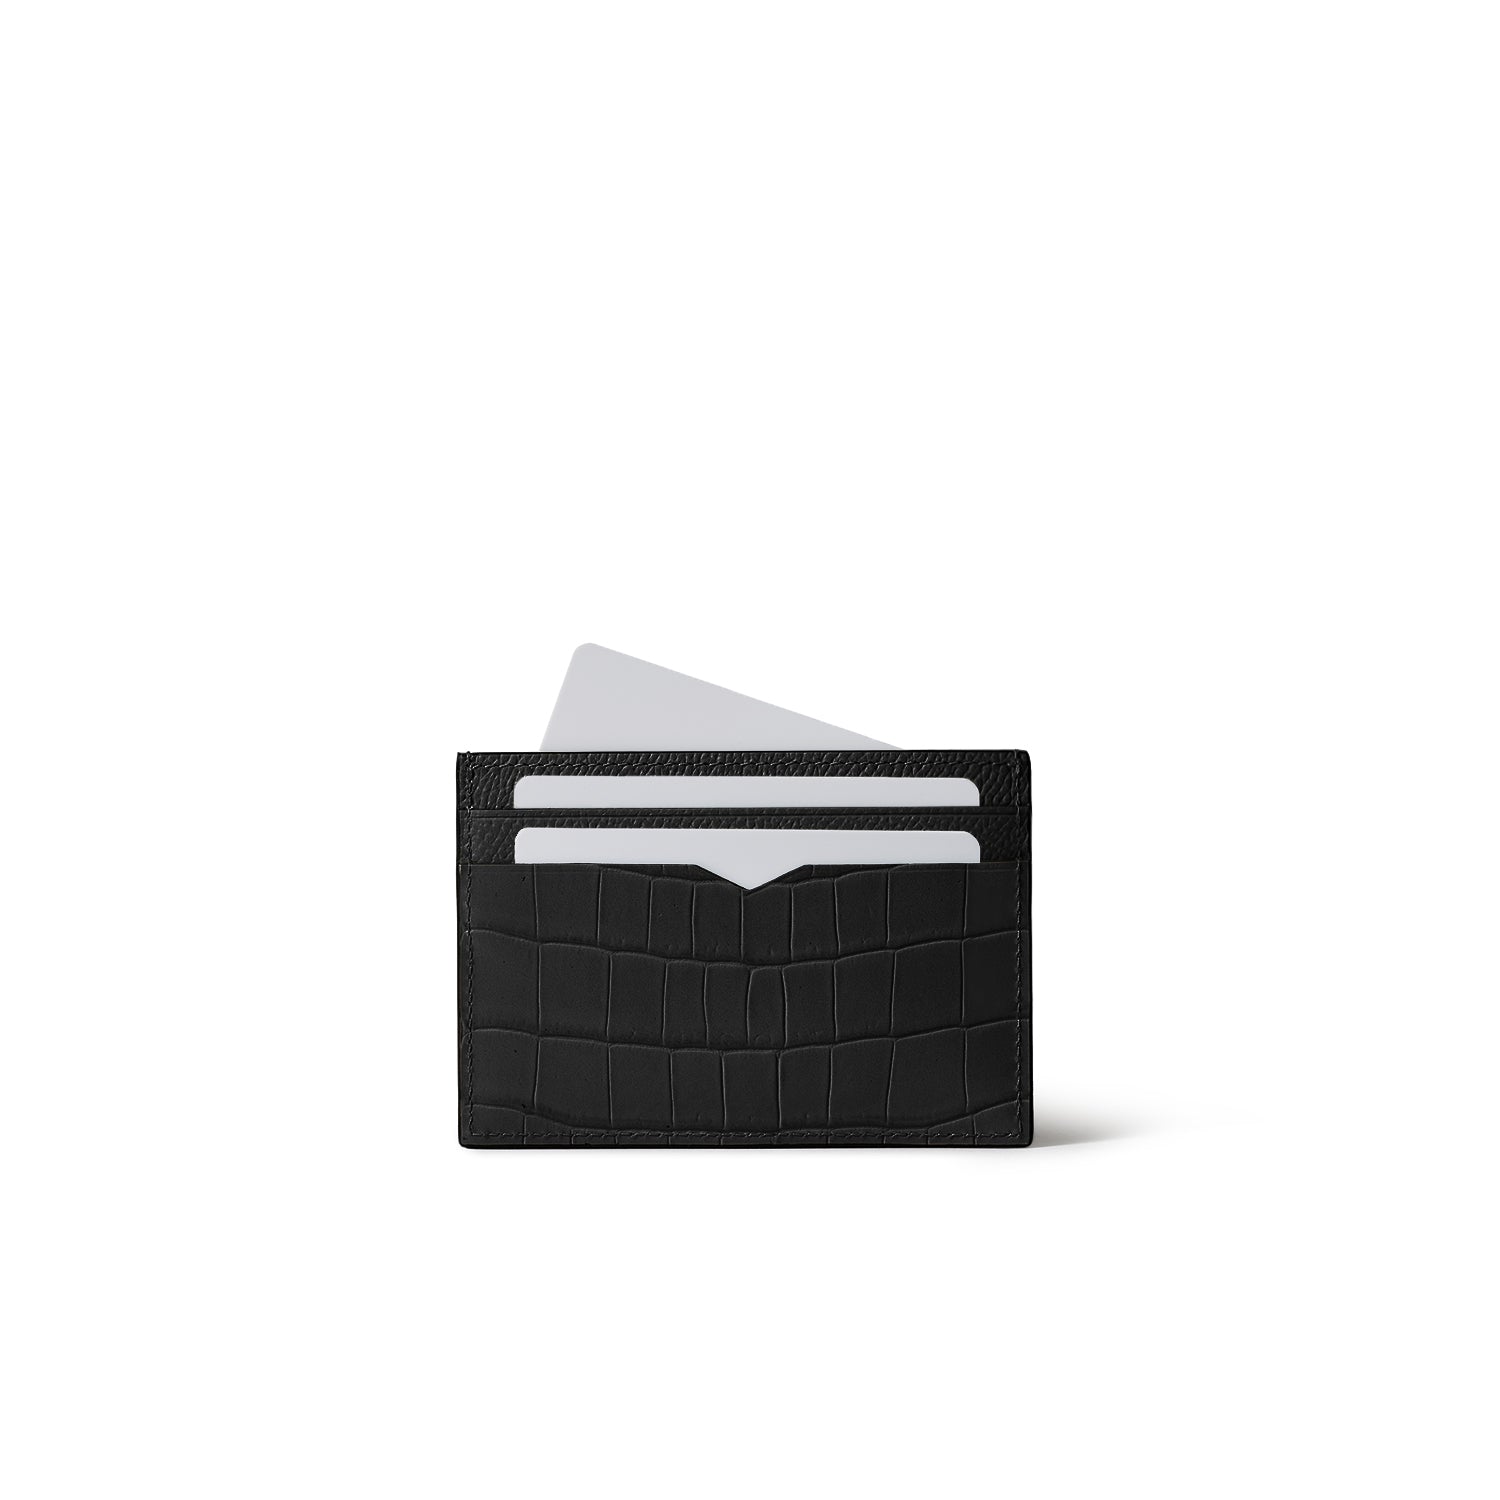 Slim card case in Noblesse and embossed crocodile leather